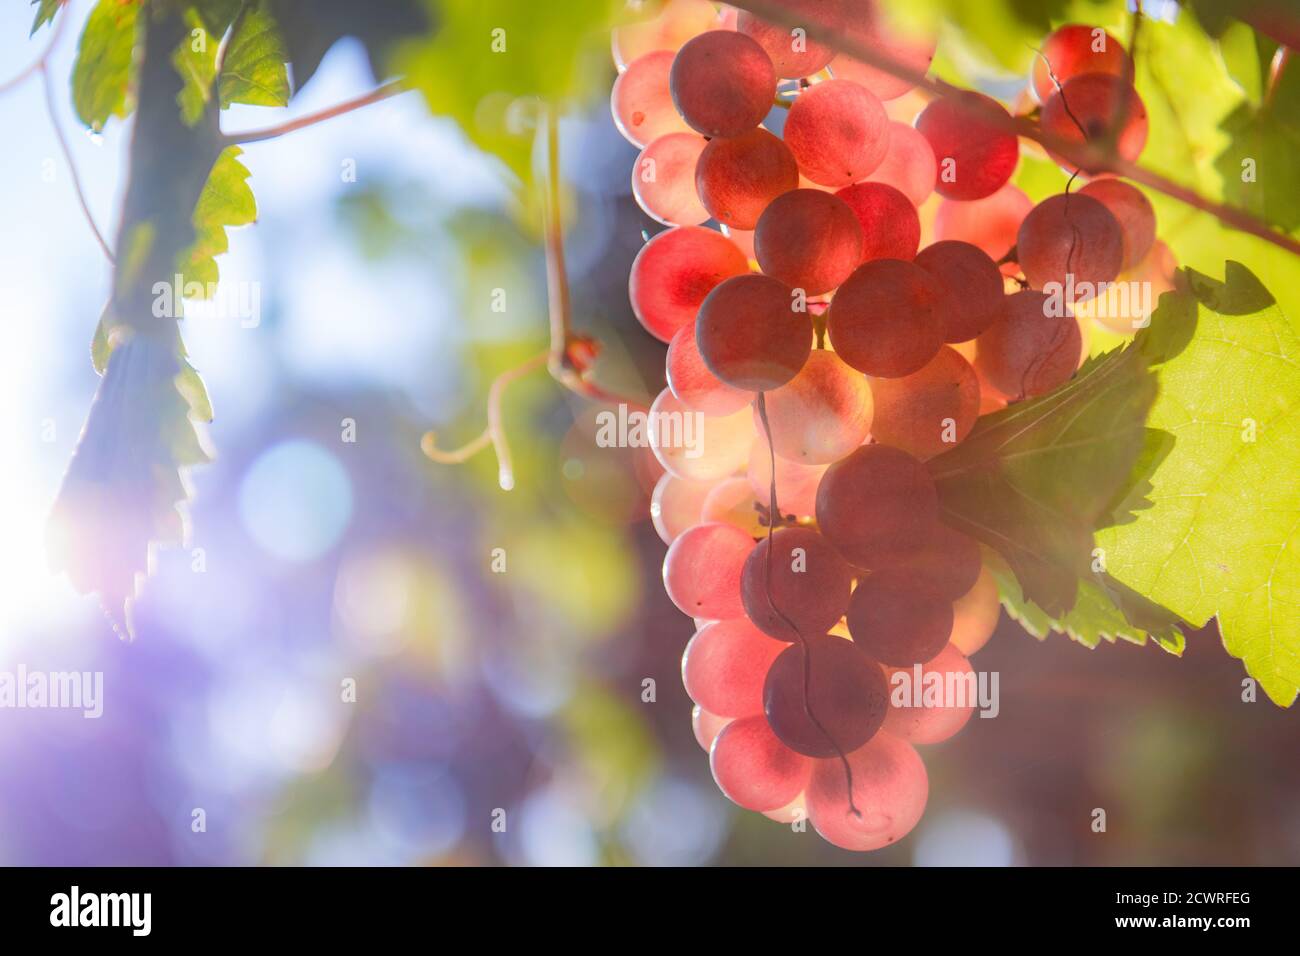 Bunch of pink grapes Stock Photo